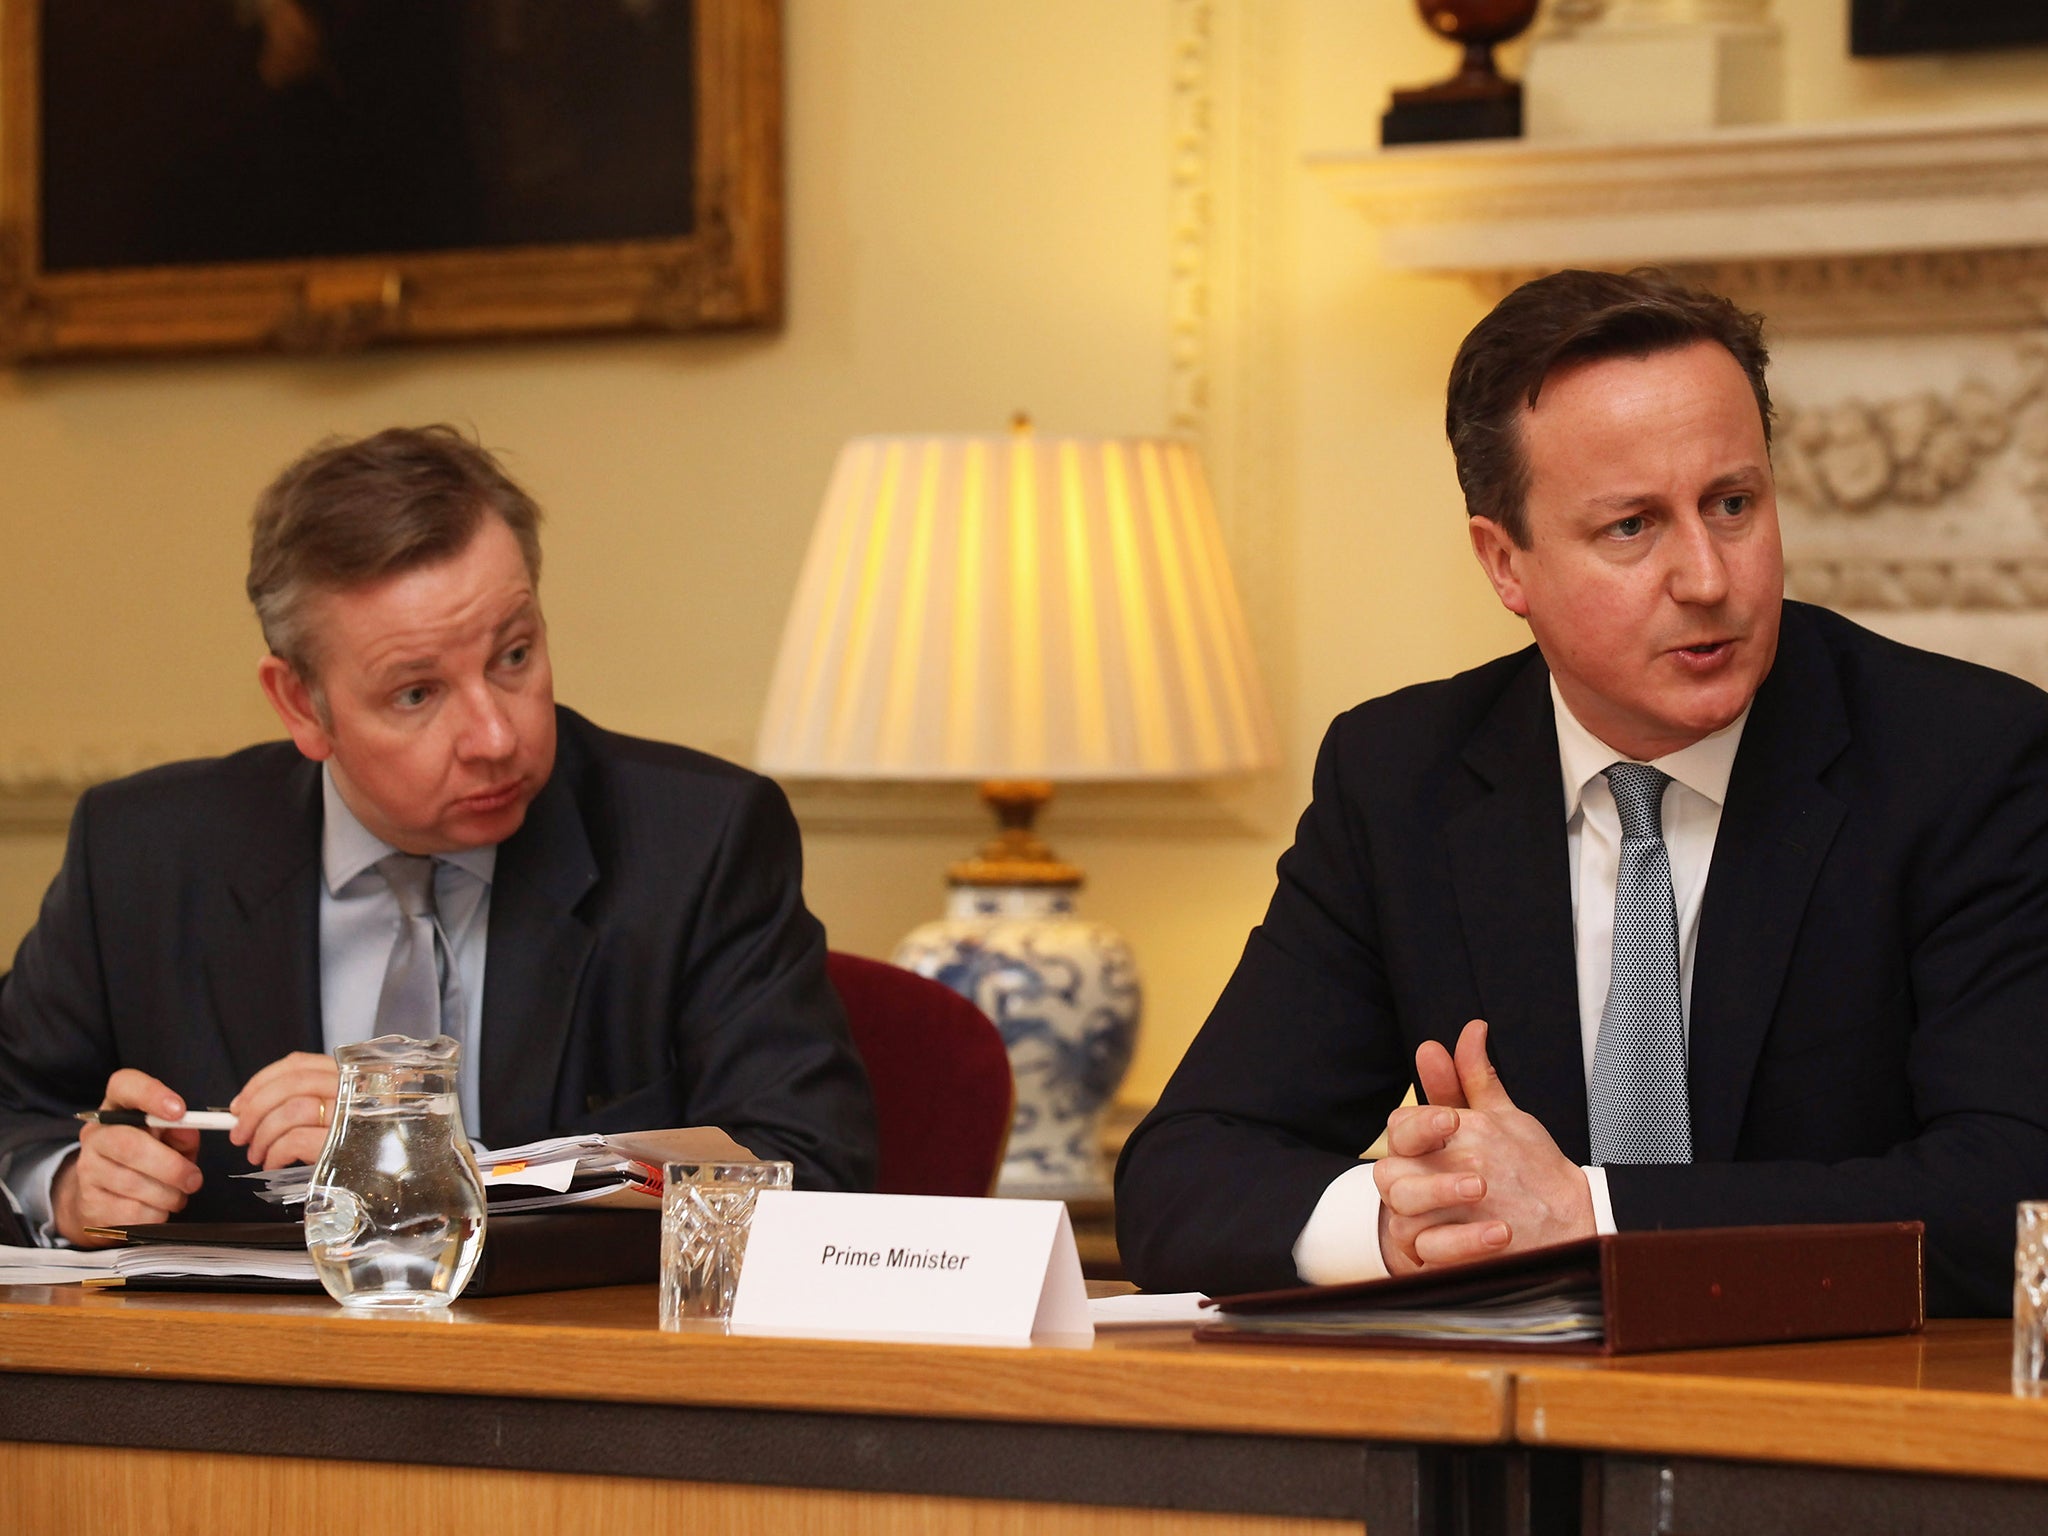 Michael Gove and David Cameron during a meeting on education in 2012